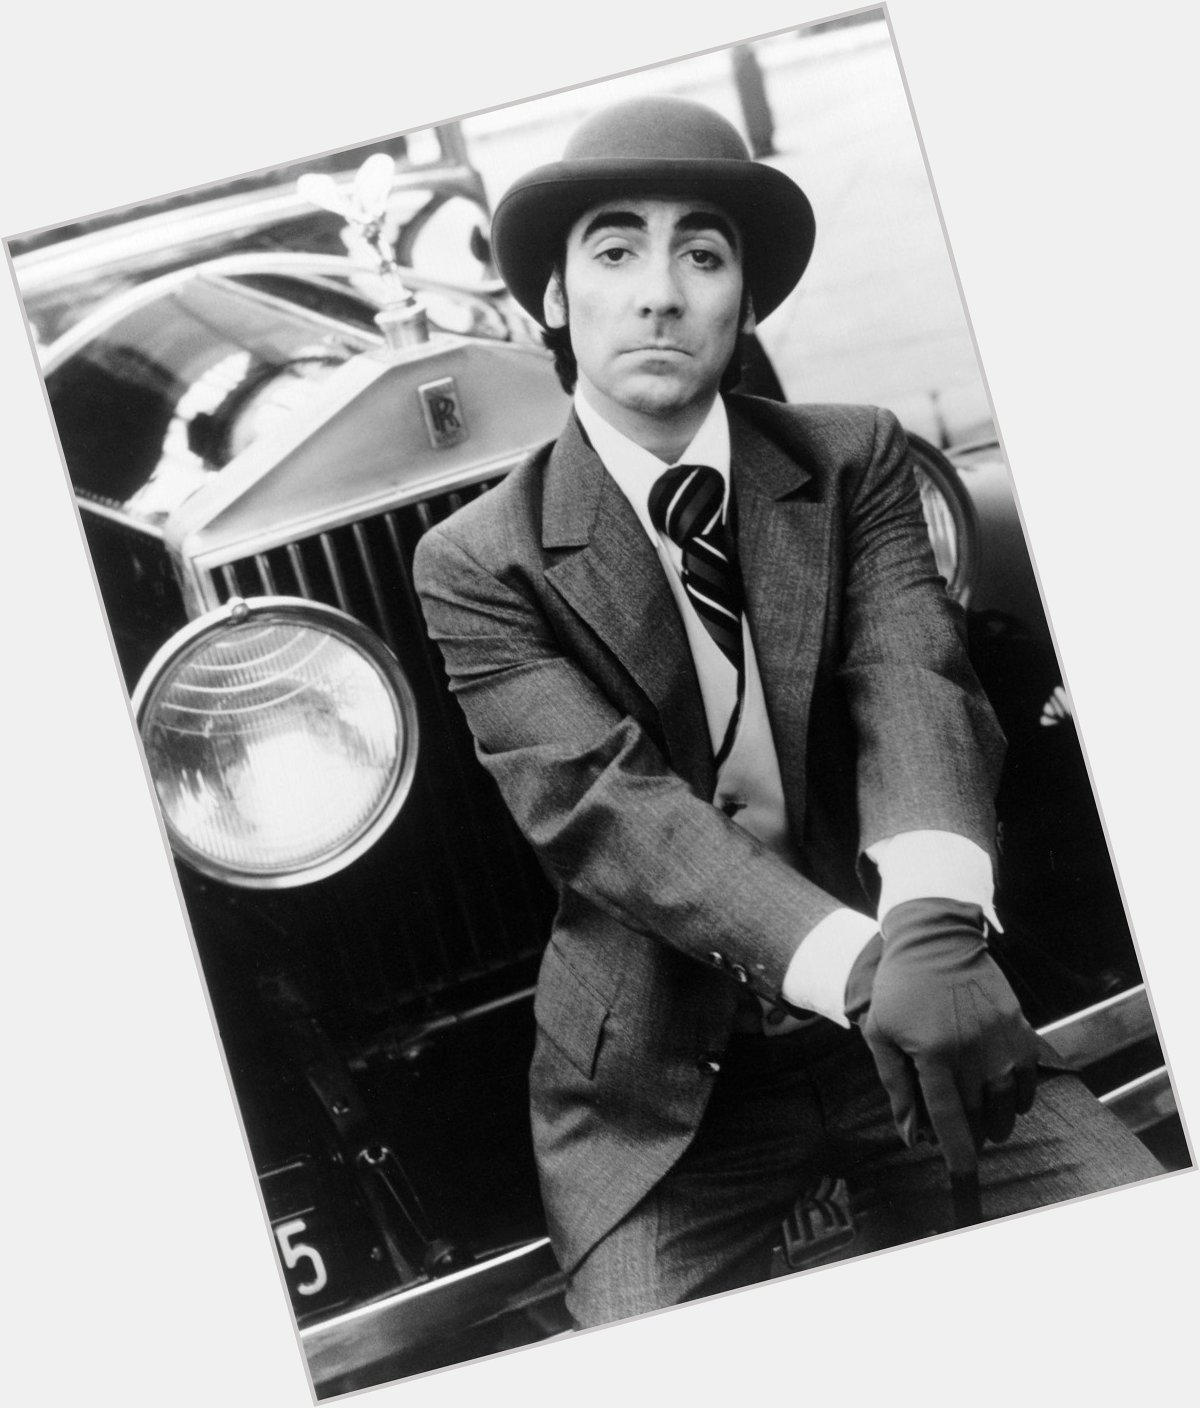 Happy birthday to the one and only, Keith Moon! 